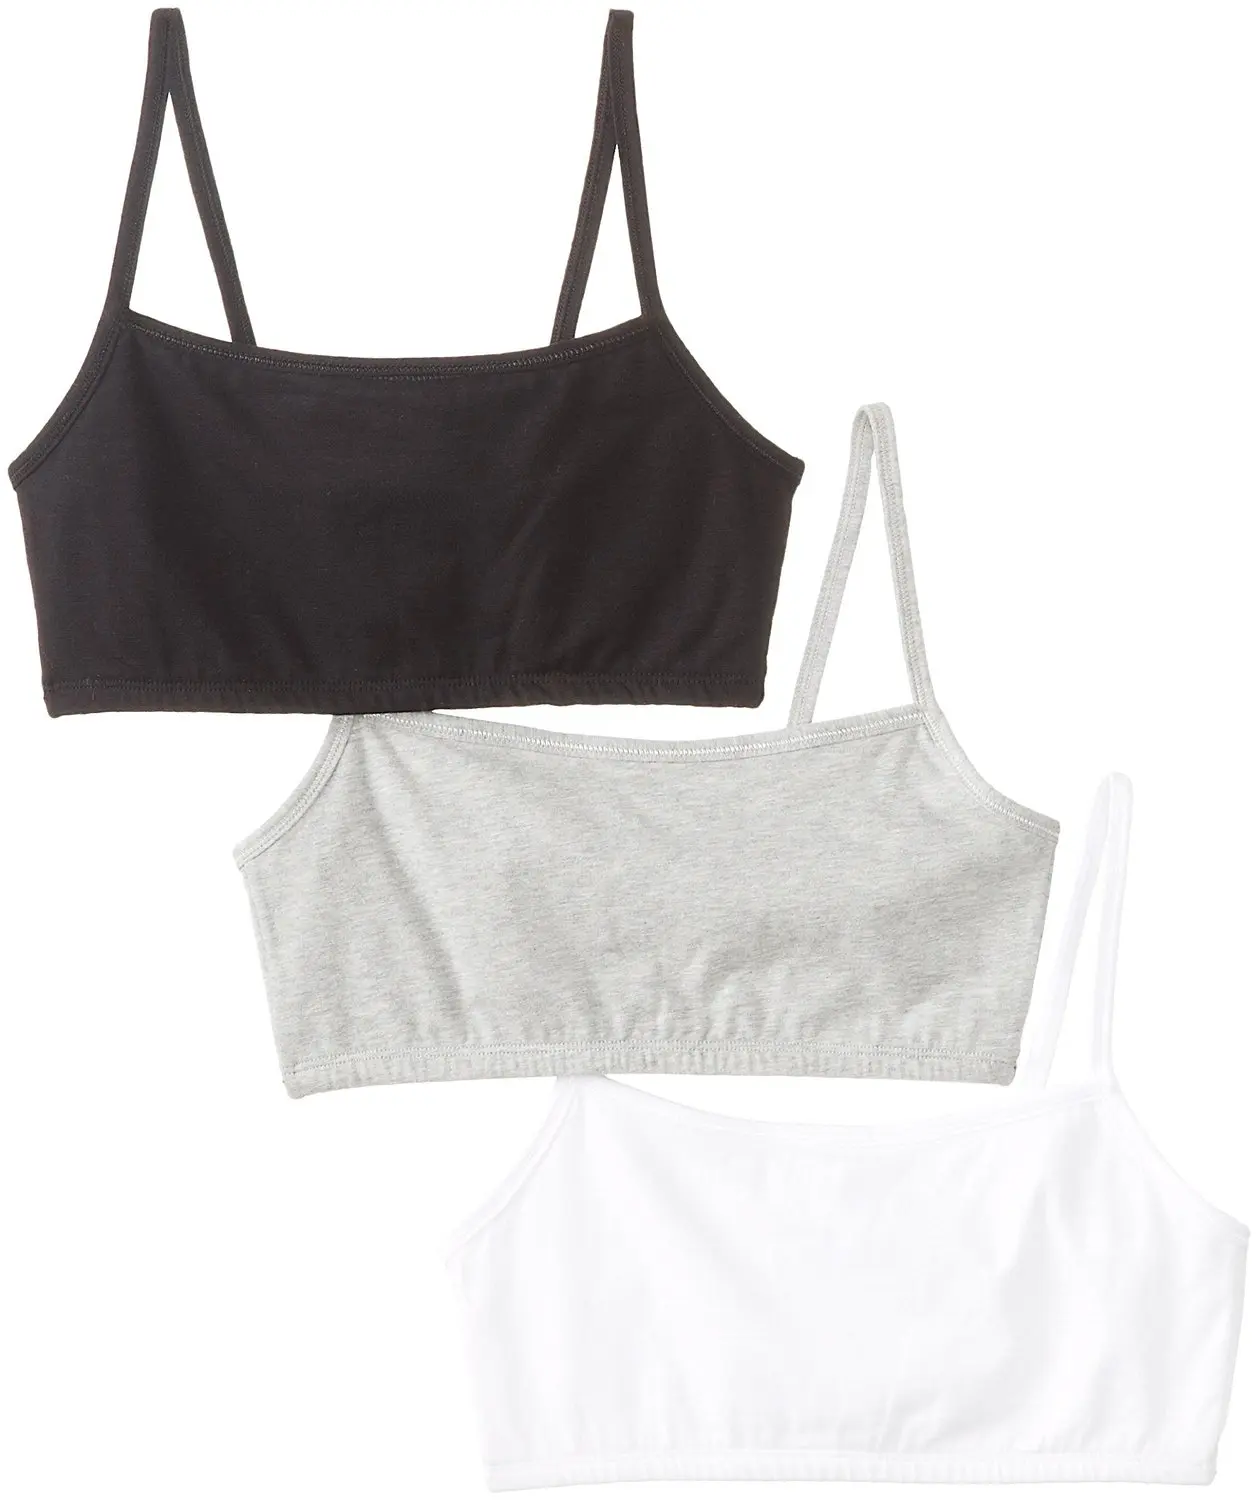 Buy Fruit of the Loom Womens Cotton Pullover Sport Bra (Pack of 3) in Cheap  Price on Alibaba.com